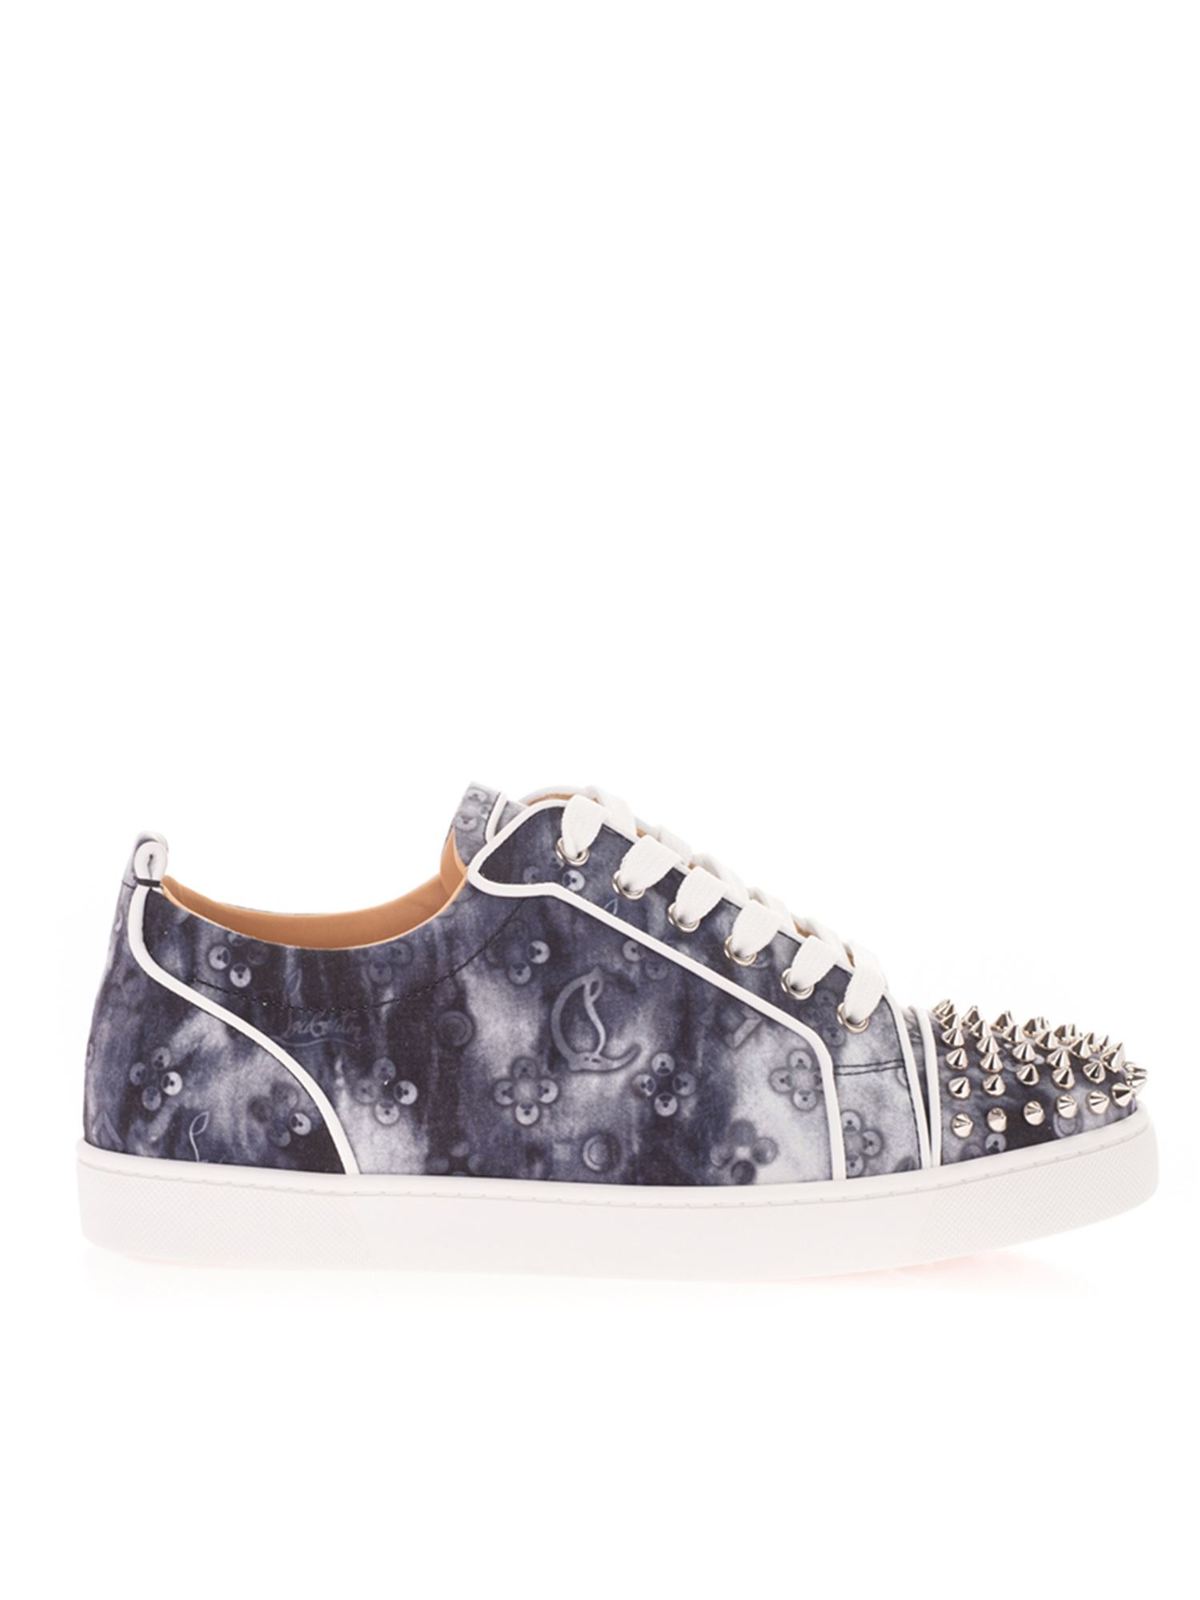 Christian Louboutin Lou Spike Blue And White Sneakers New